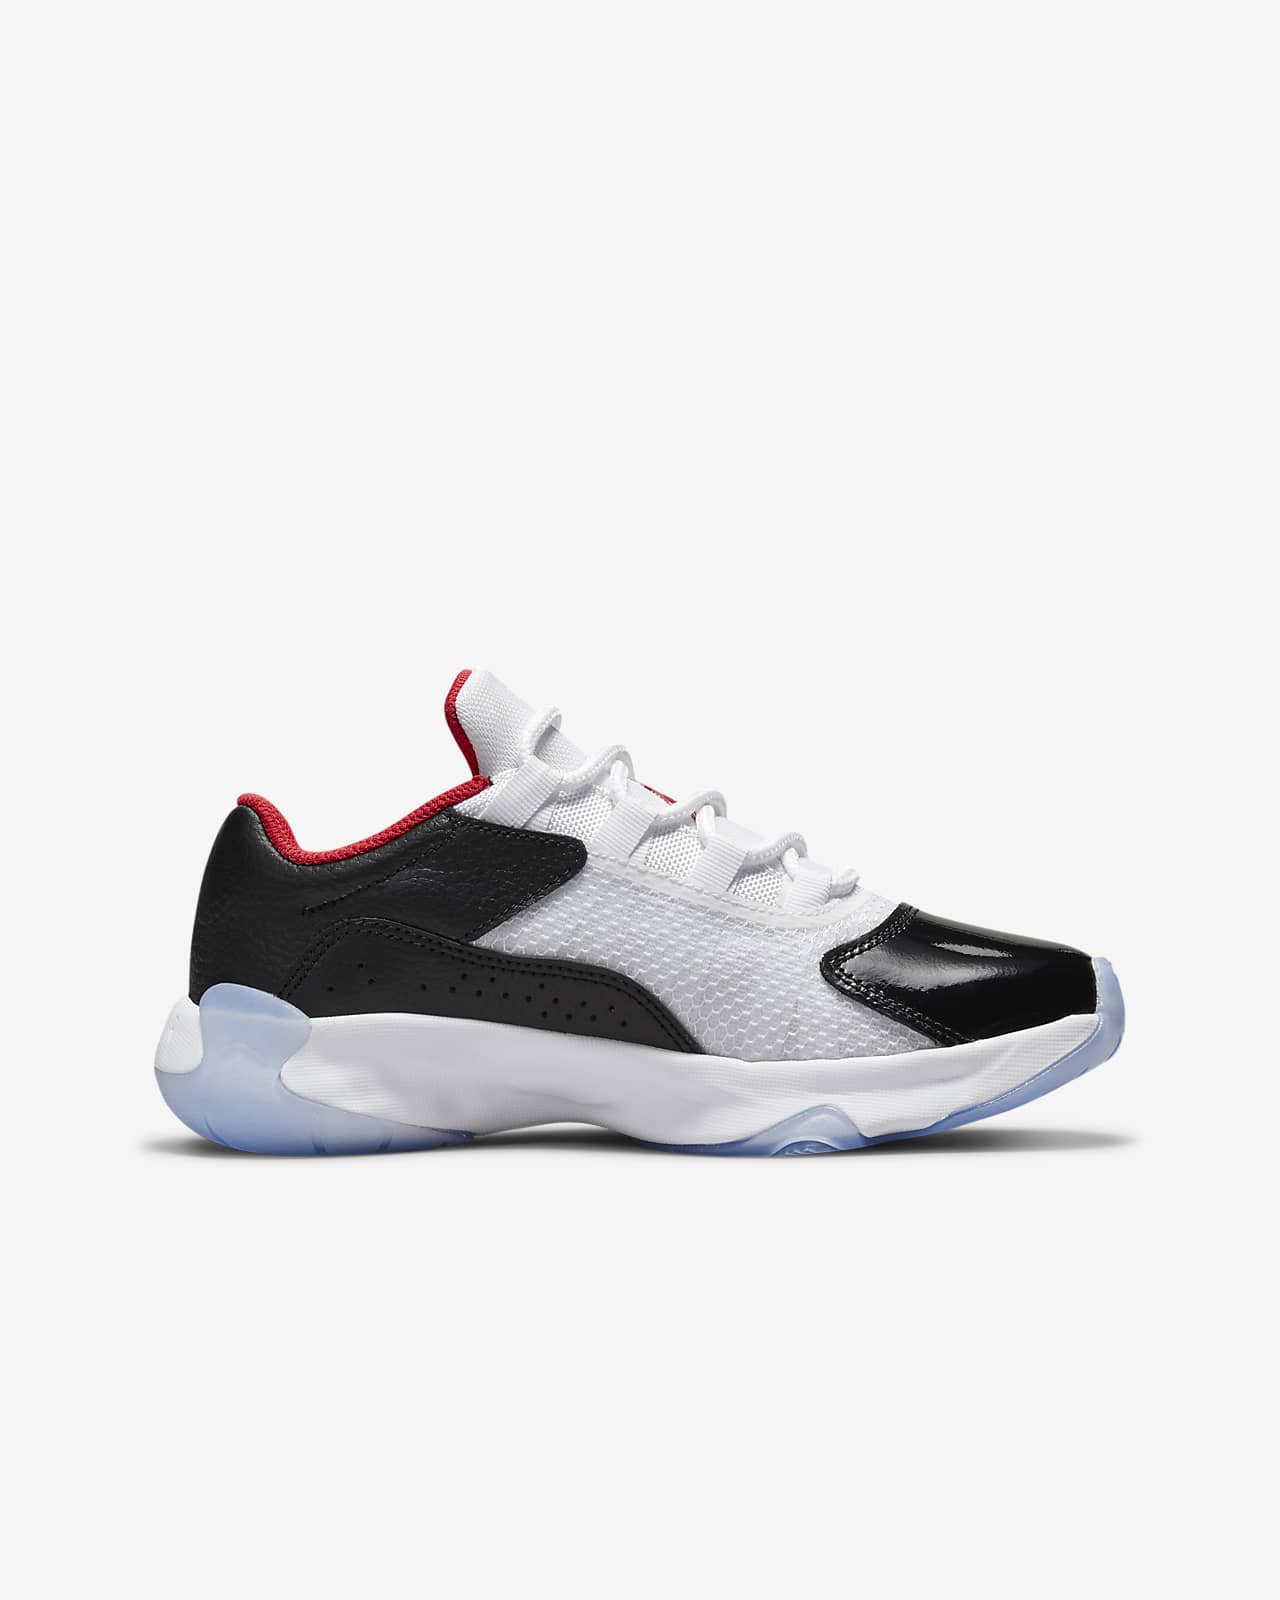 nike self lacing shoes price 2019 philippines